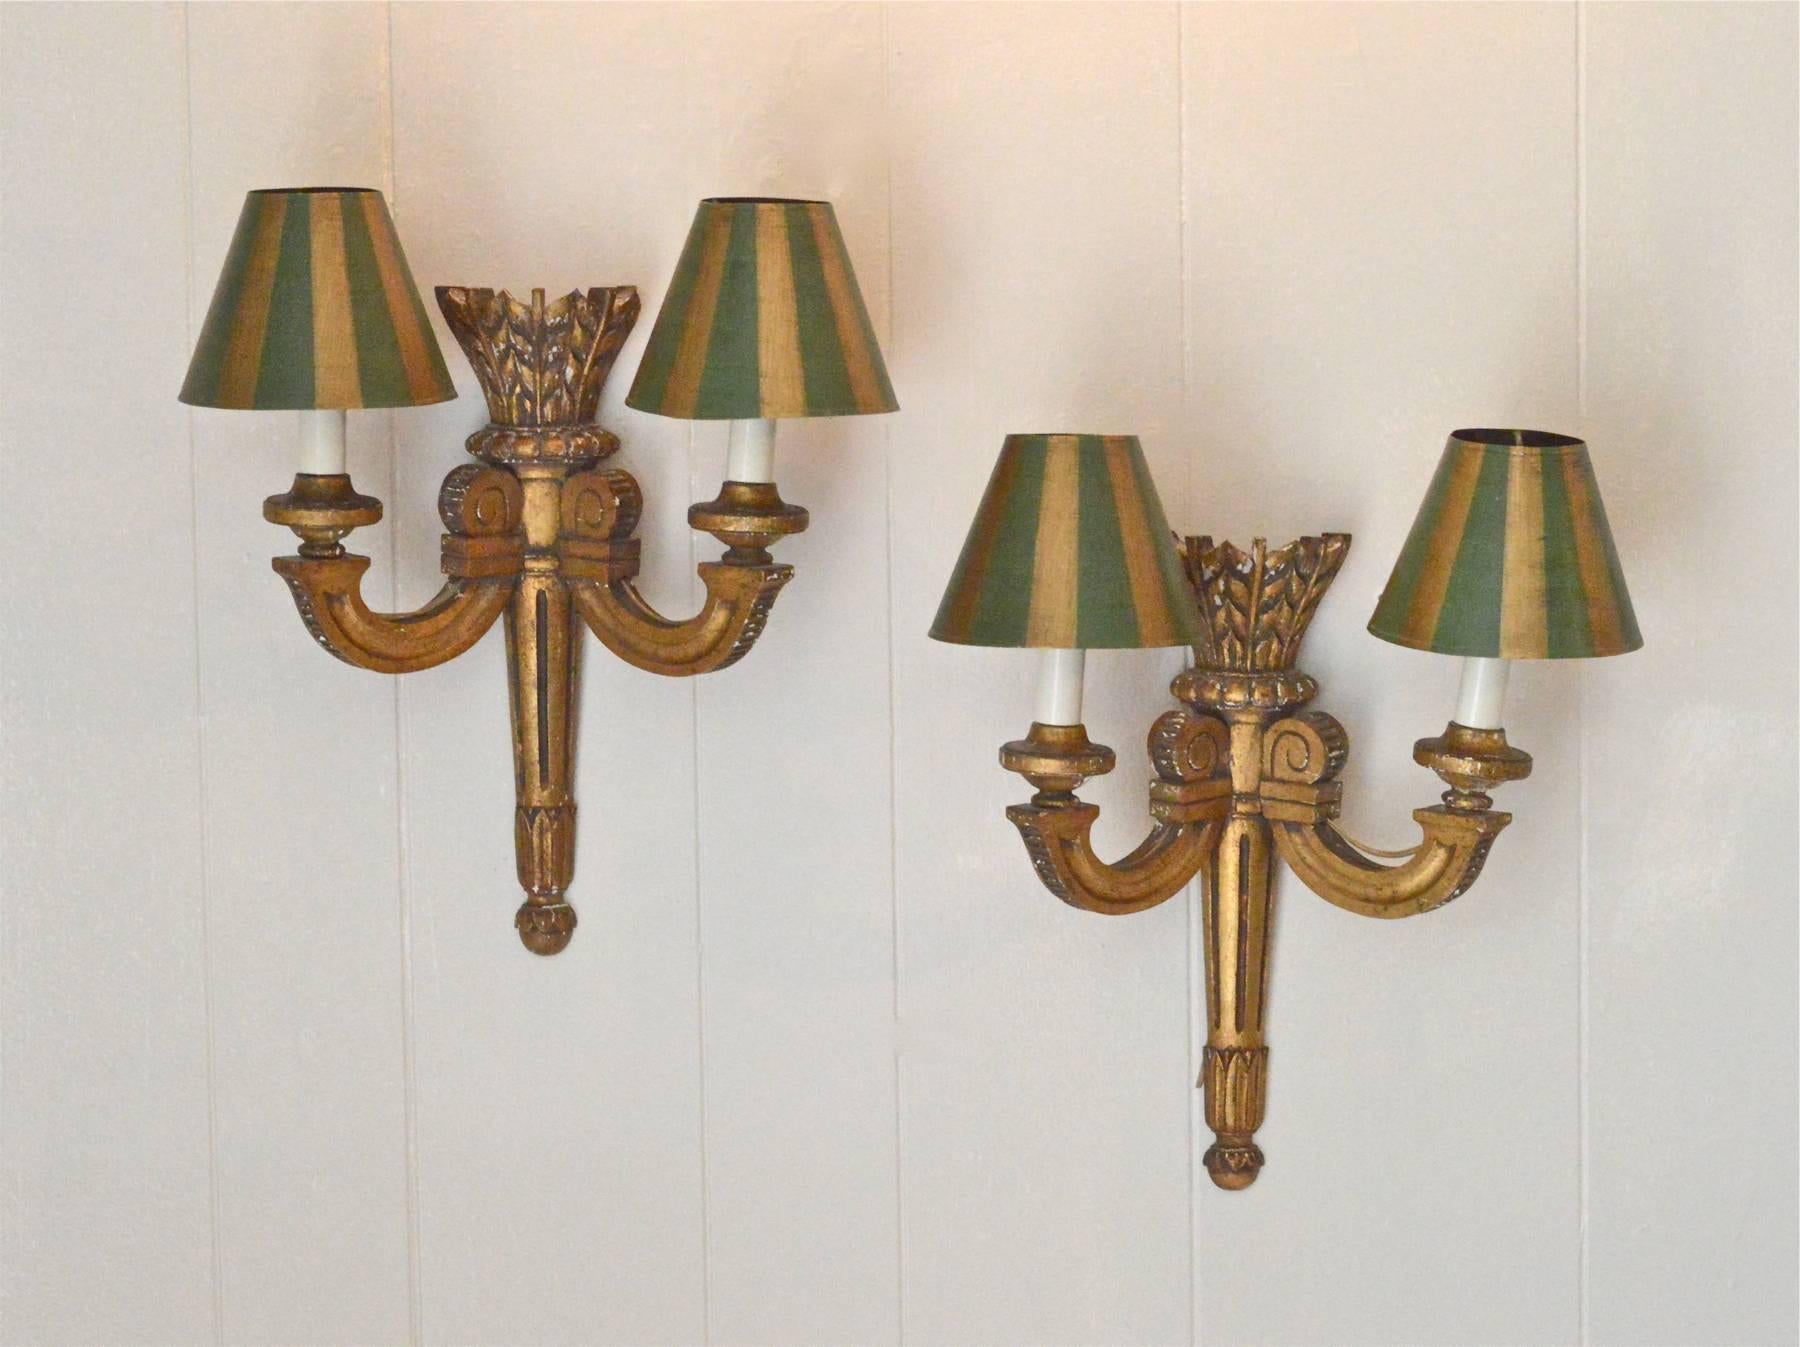 A superb pair of carved giltwood sconces in the Louis XVI taste. The pair are adorned by hand-painted tole' shades in green and gold. Electrified and in working order, these late 19th century sconces will transform any space in which they are